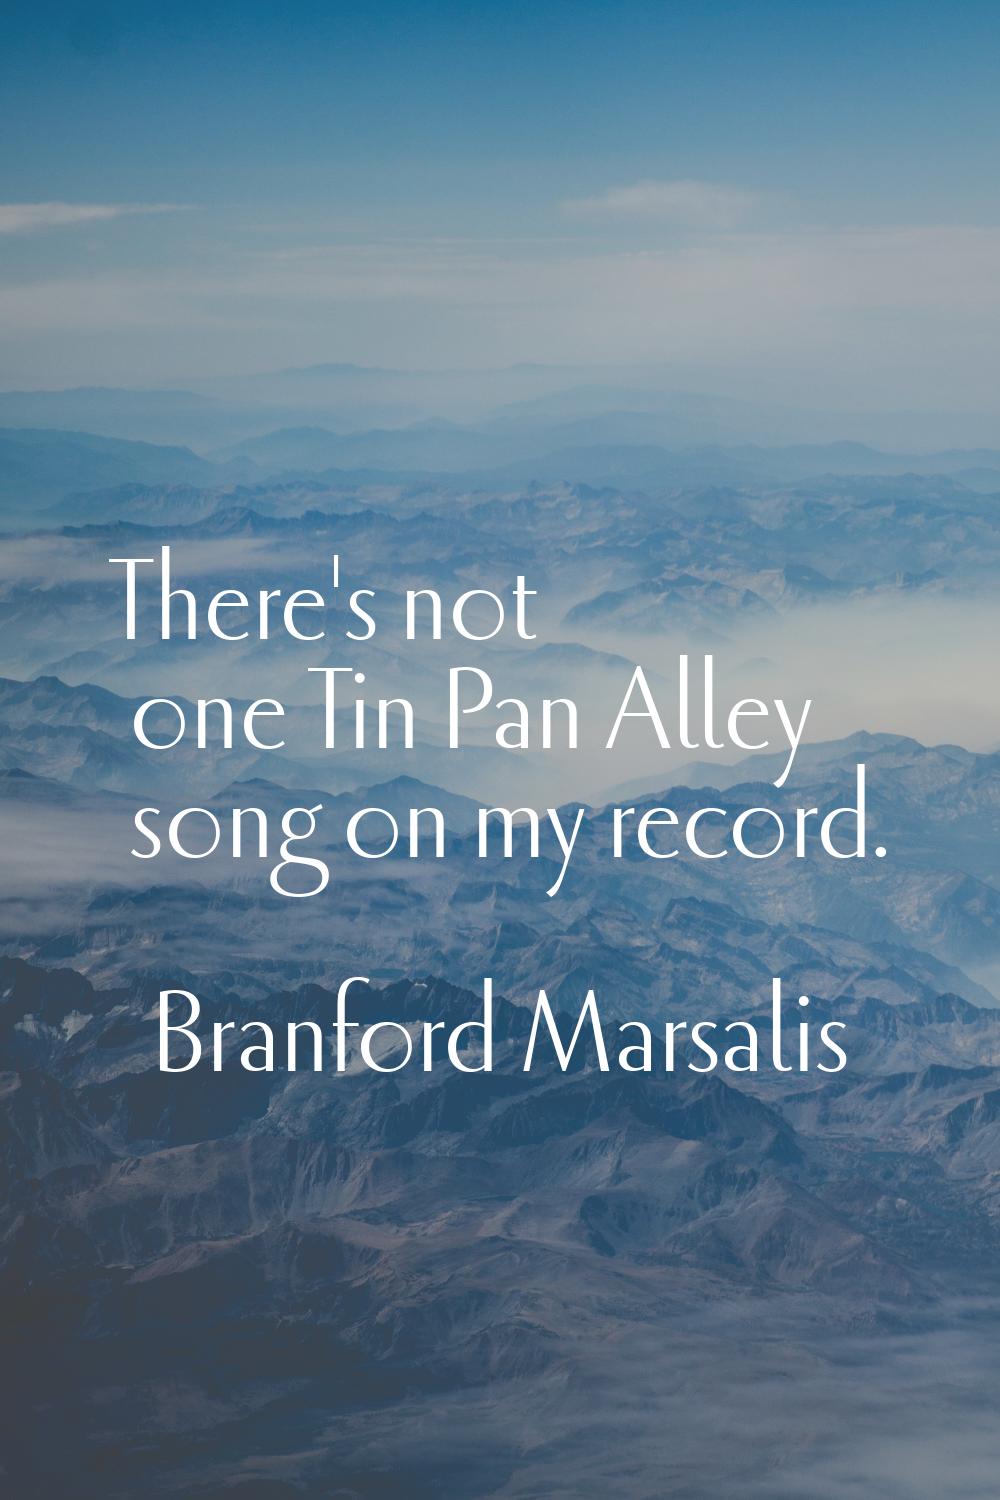 There's not one Tin Pan Alley song on my record.